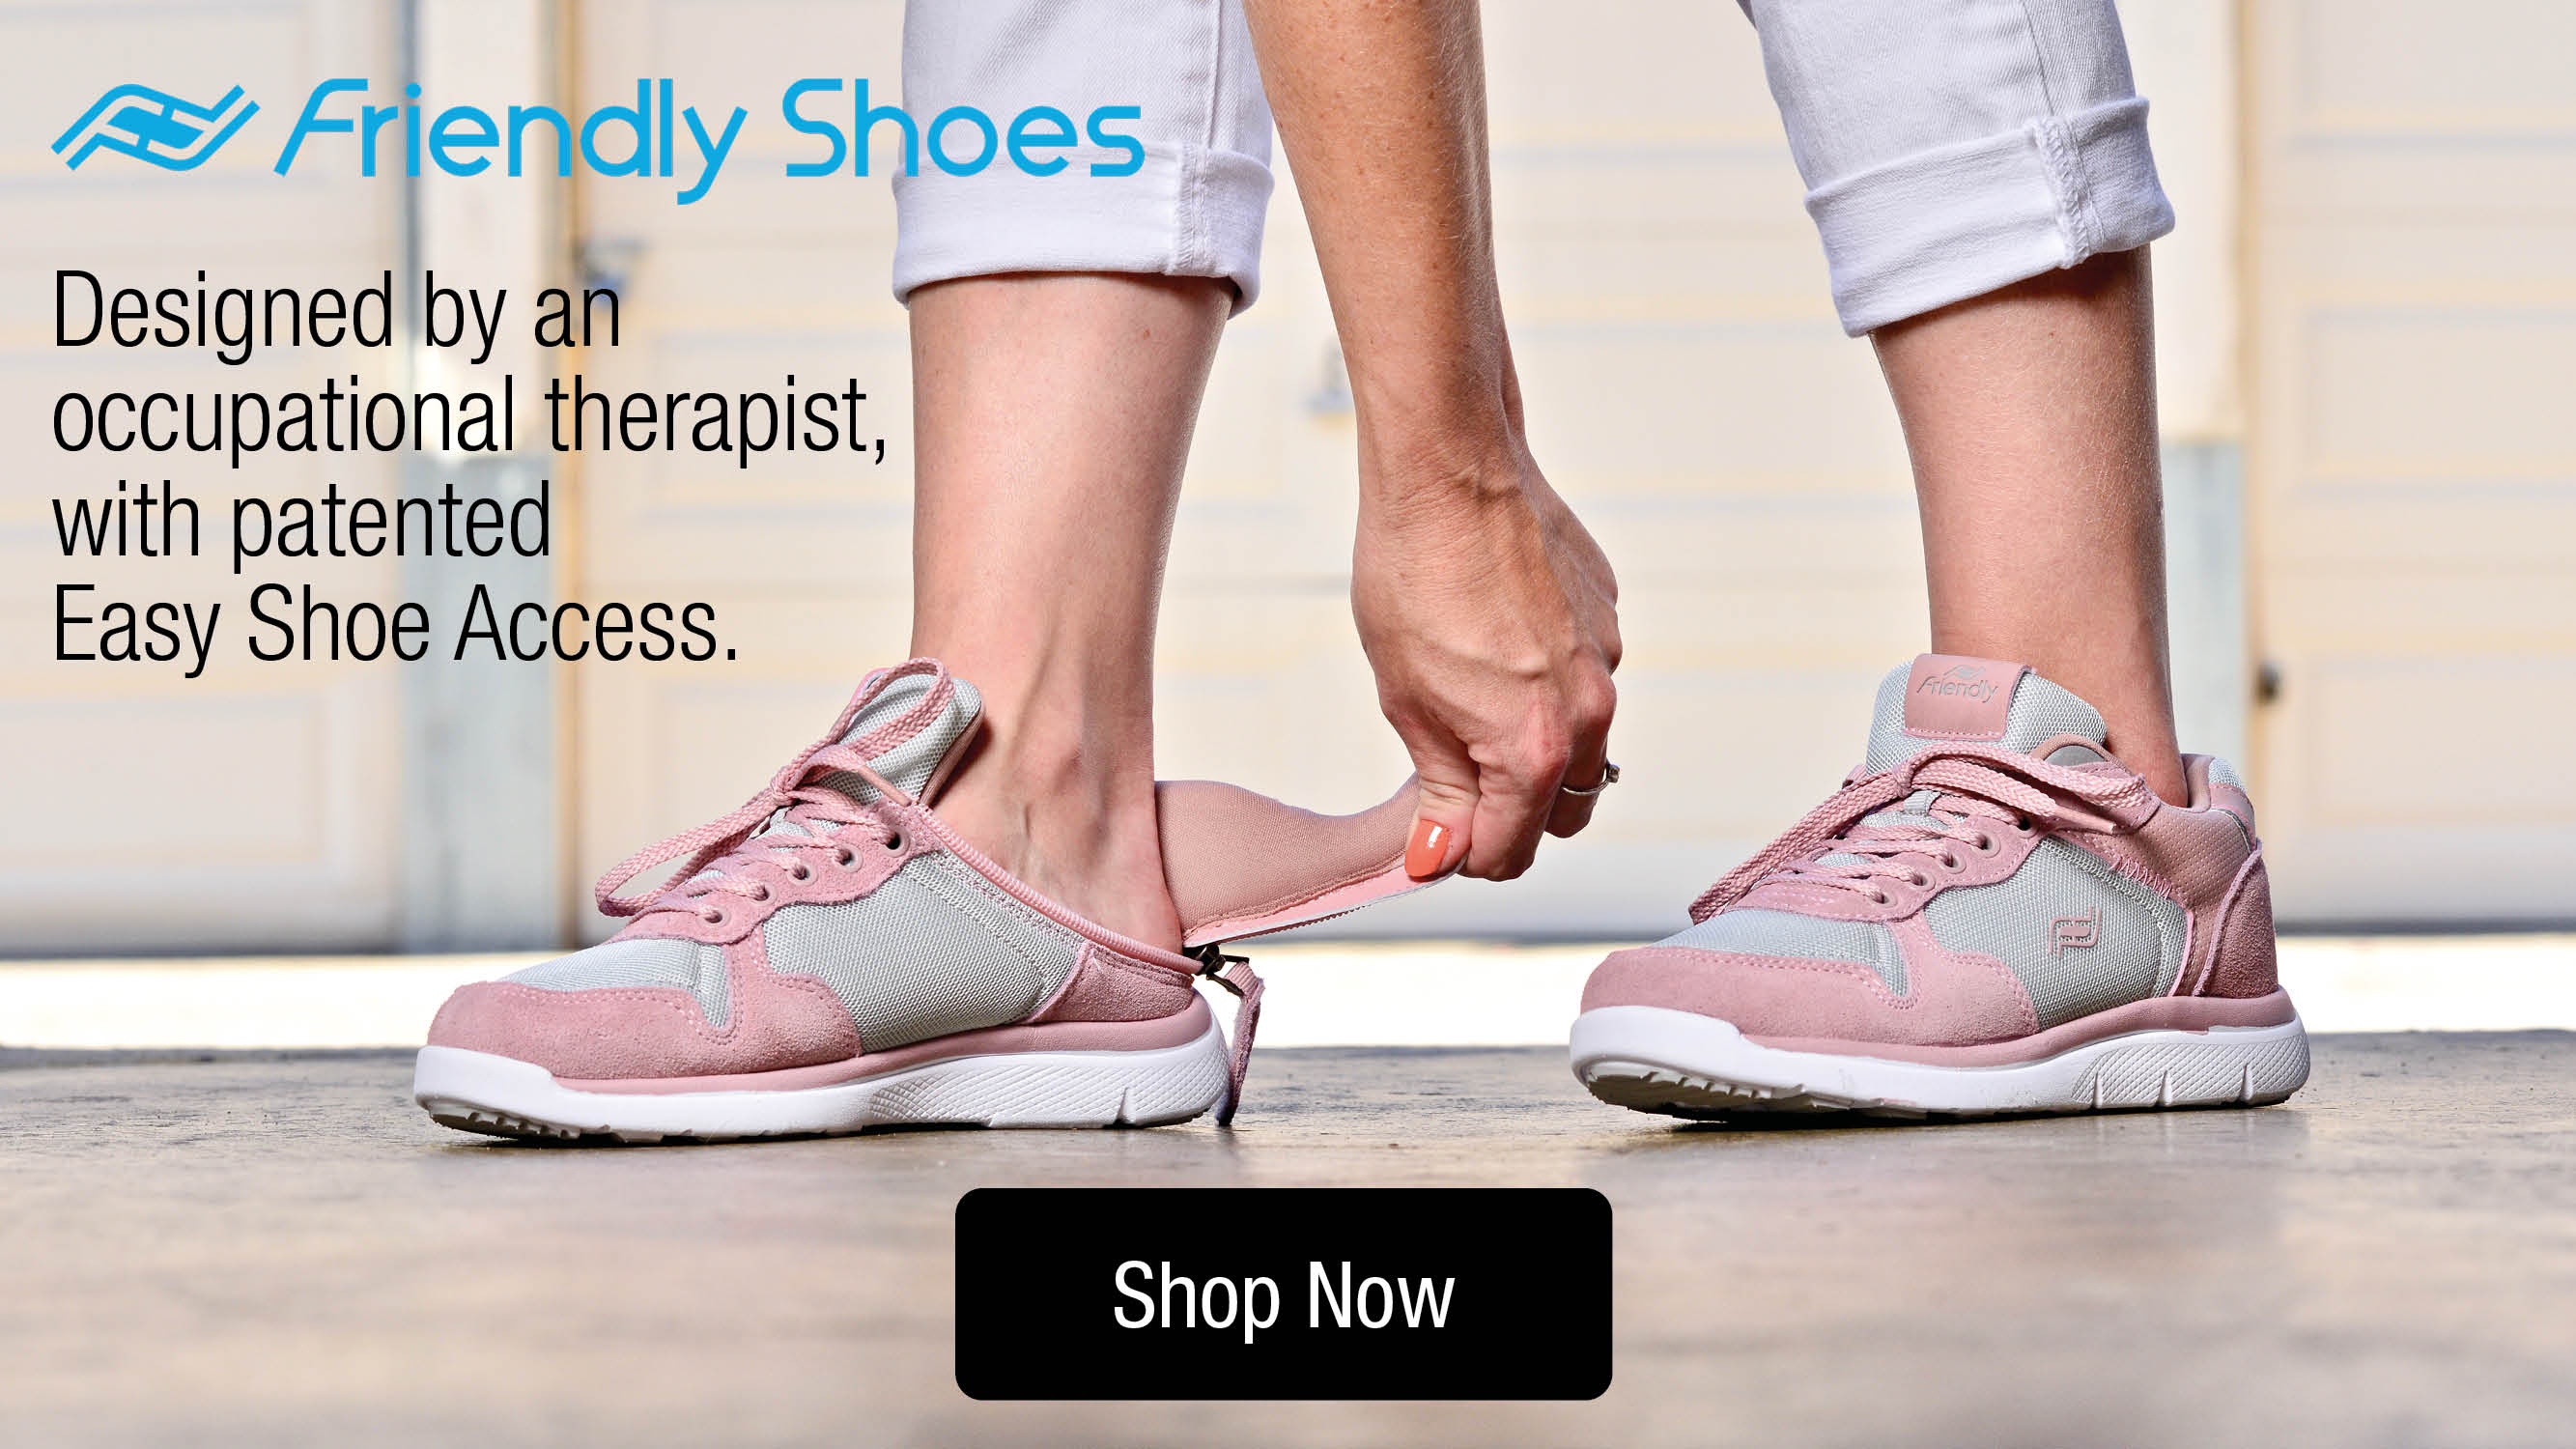 Stylish Comfortable Shoes, Orthotic Insoles & Foot Care